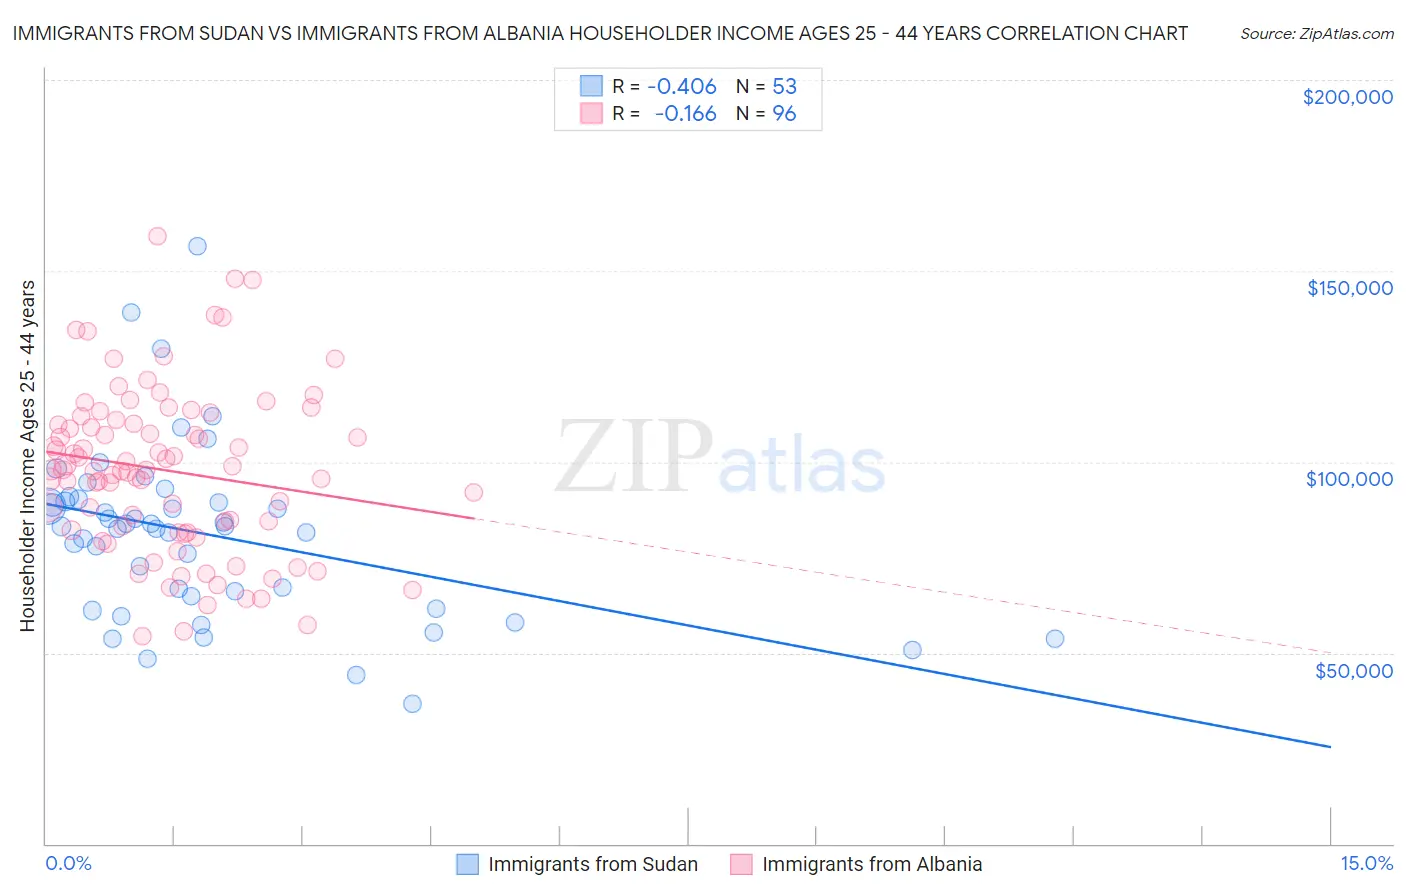 Immigrants from Sudan vs Immigrants from Albania Householder Income Ages 25 - 44 years